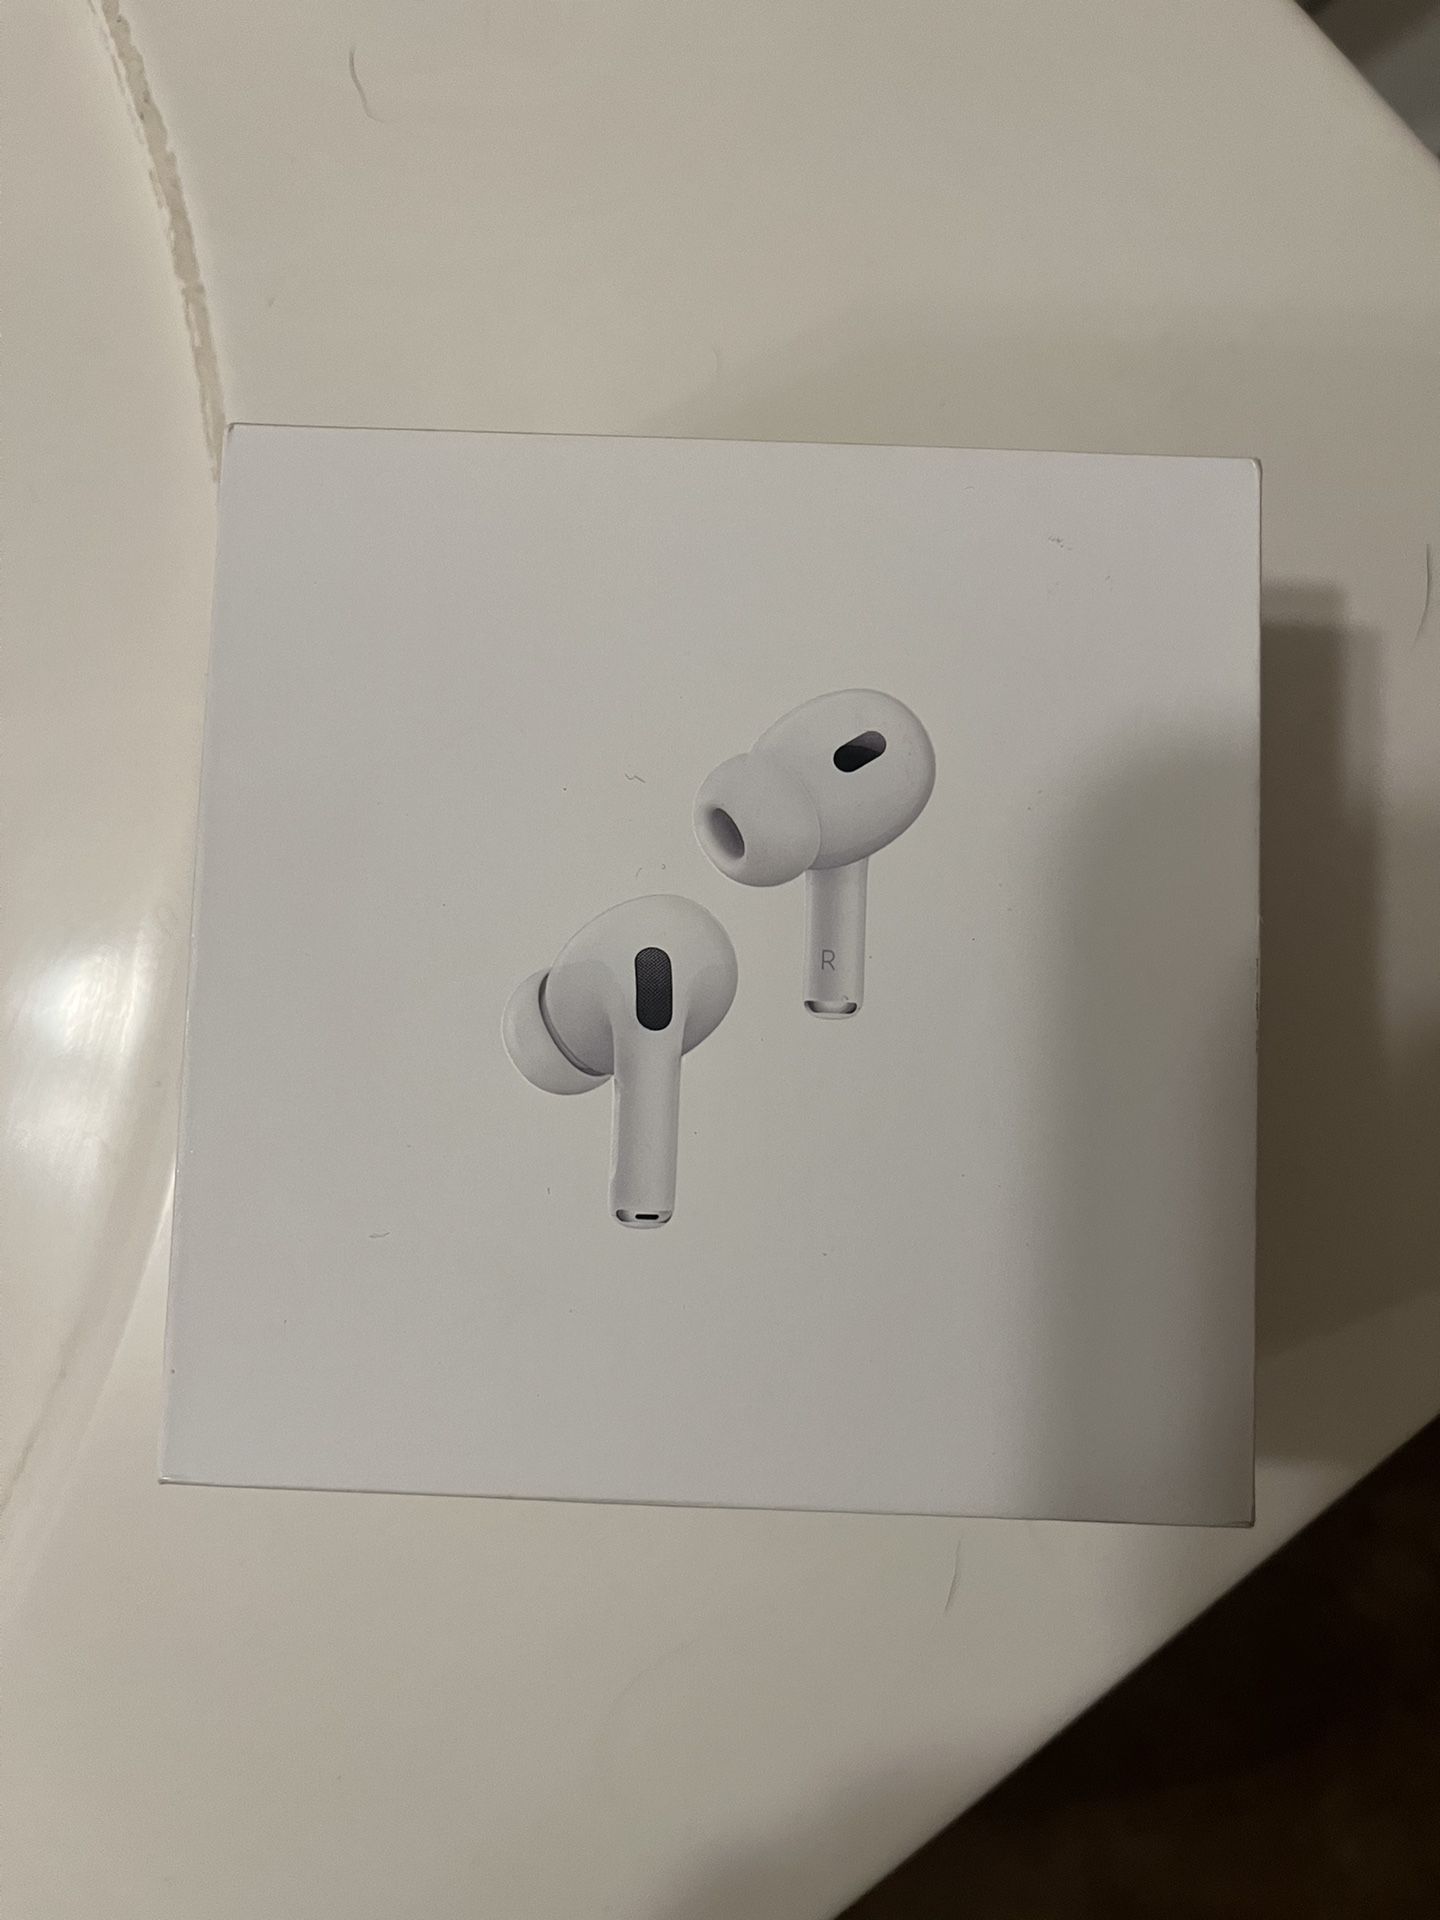 Airpod Pros Newest Generation